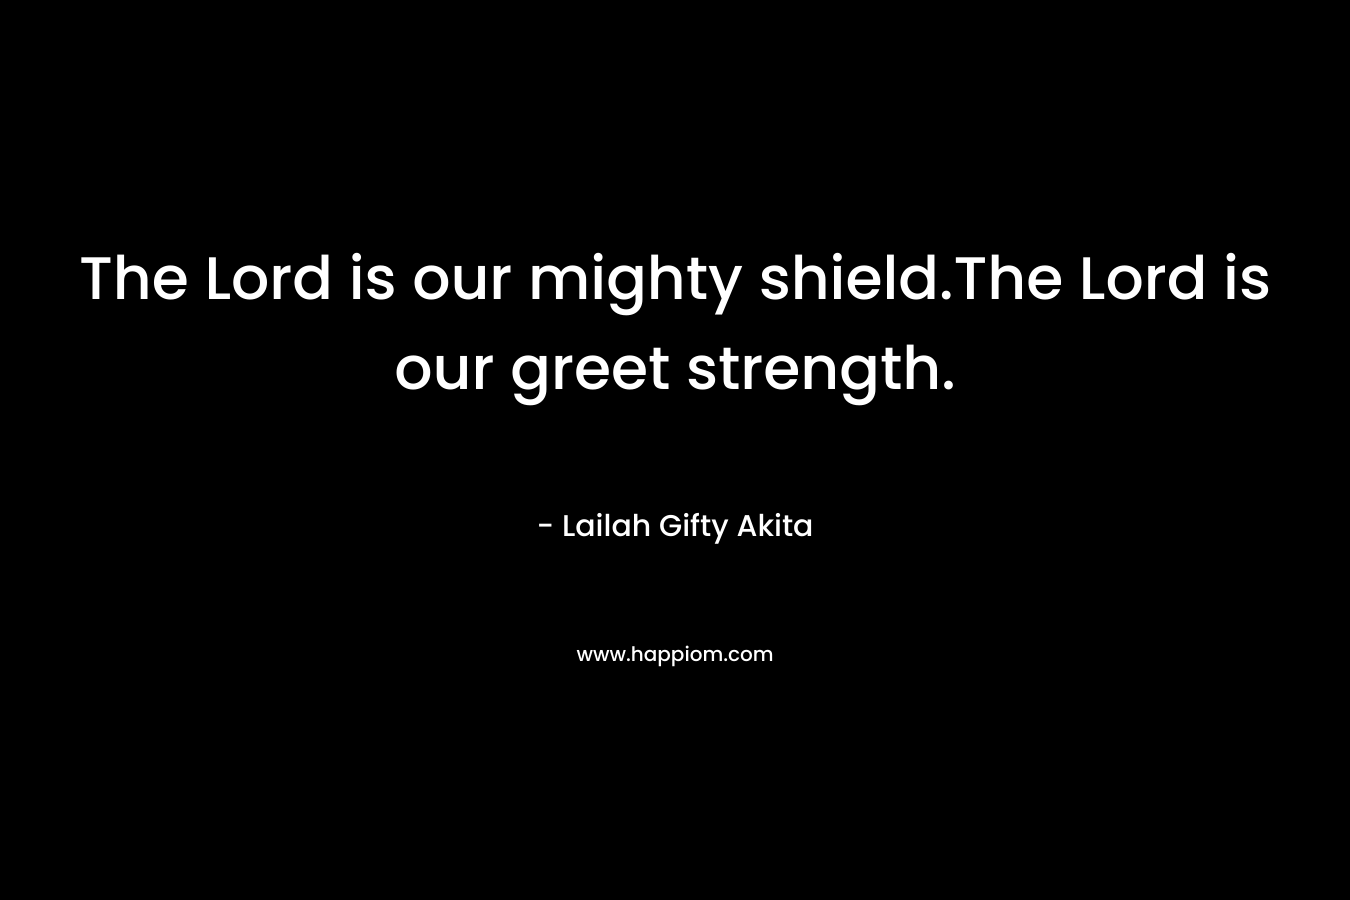 The Lord is our mighty shield.The Lord is our greet strength.